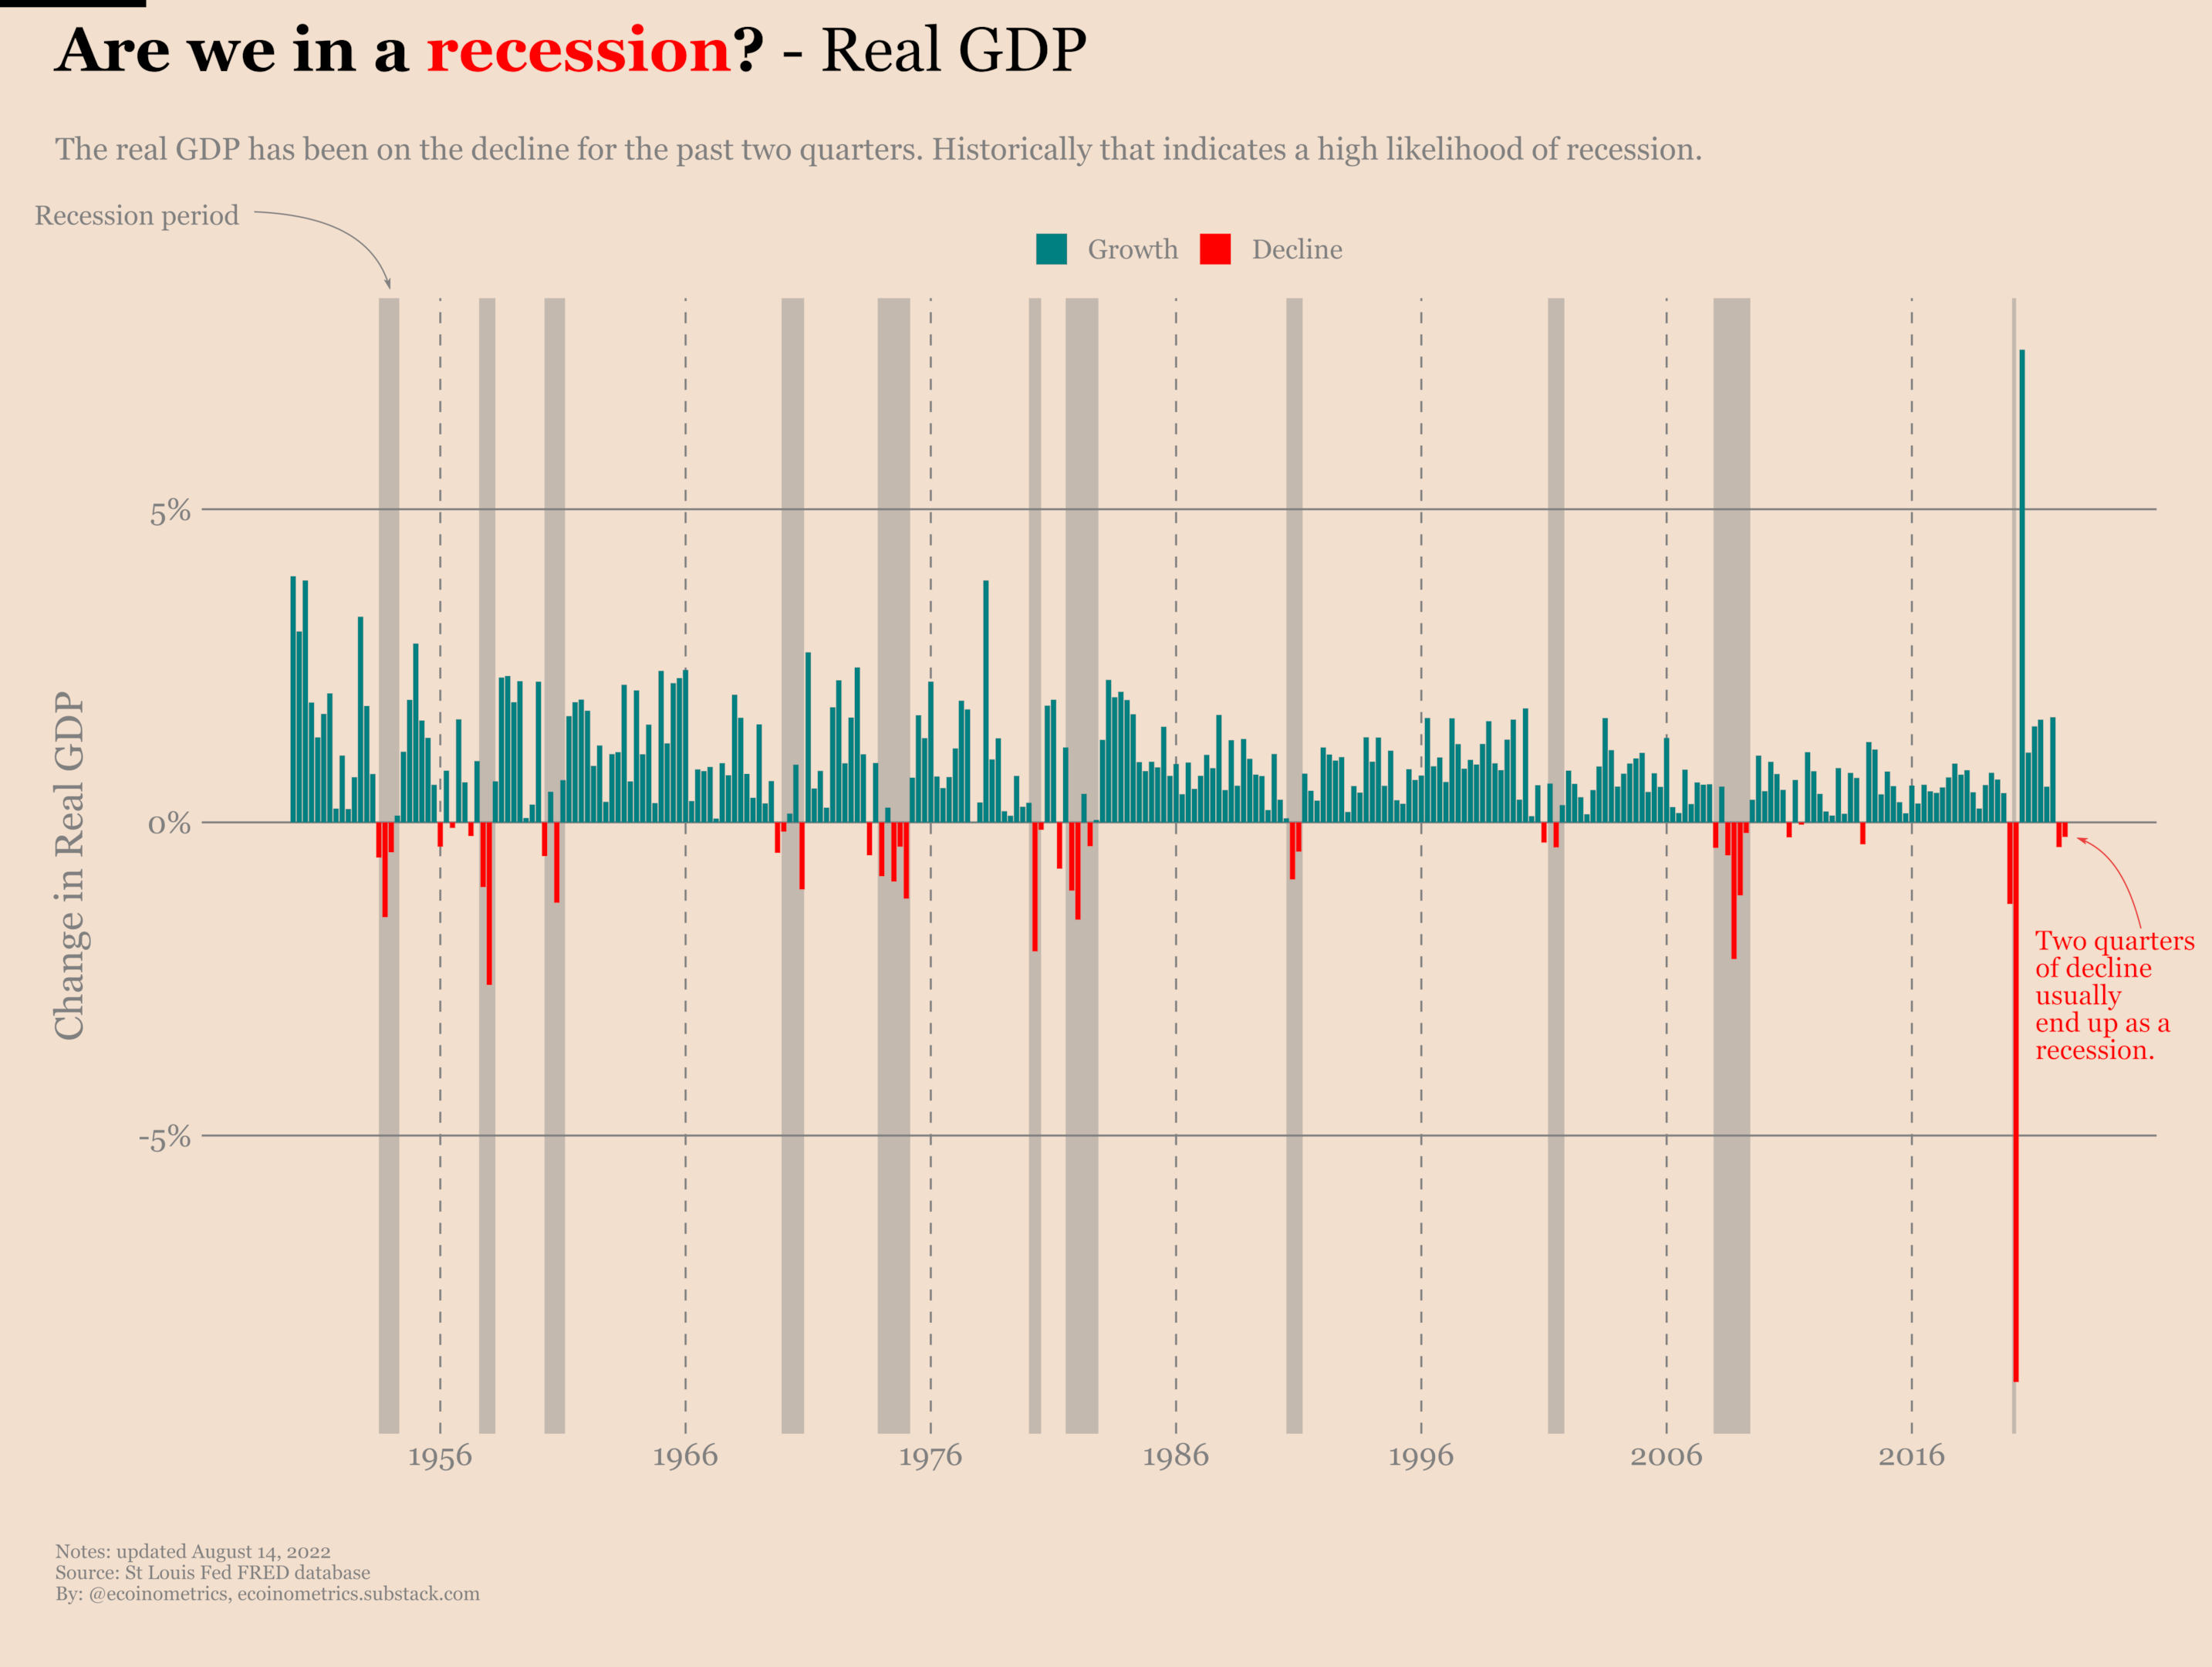 Two negative real GDP quarters have always meant a recession for the past 80 years.